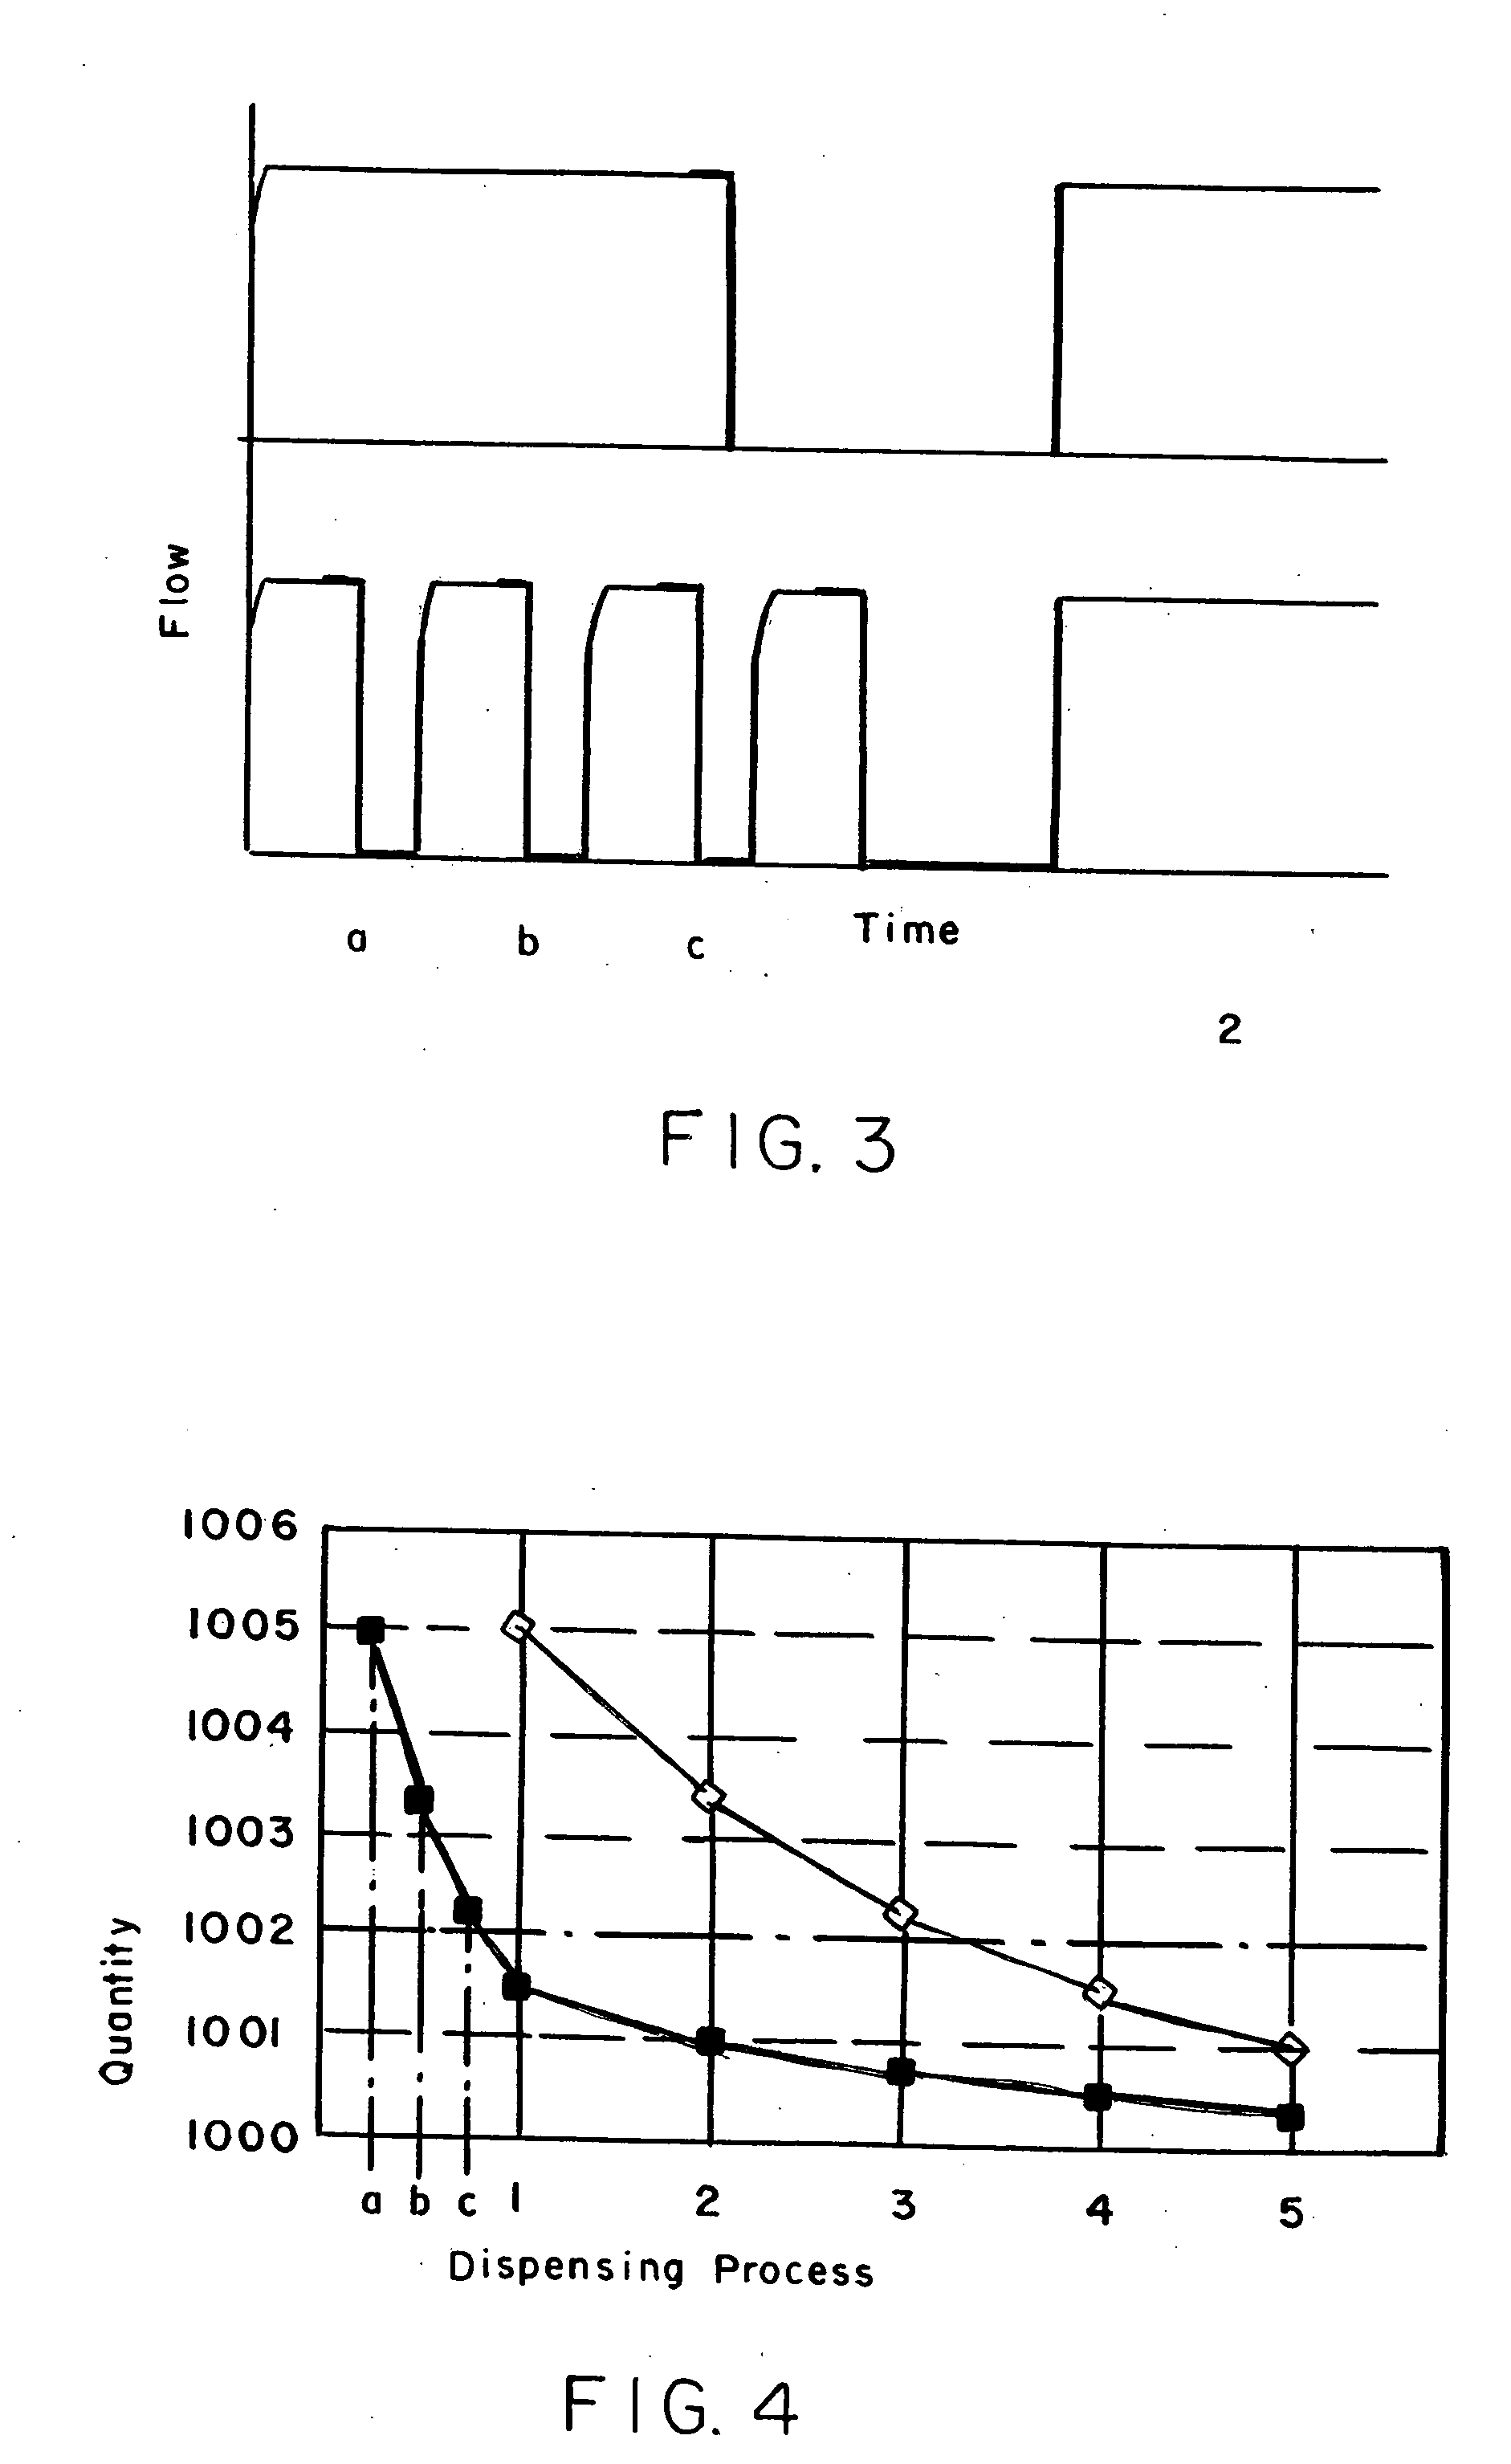 Method for filling a container with a liquid or pourable substance